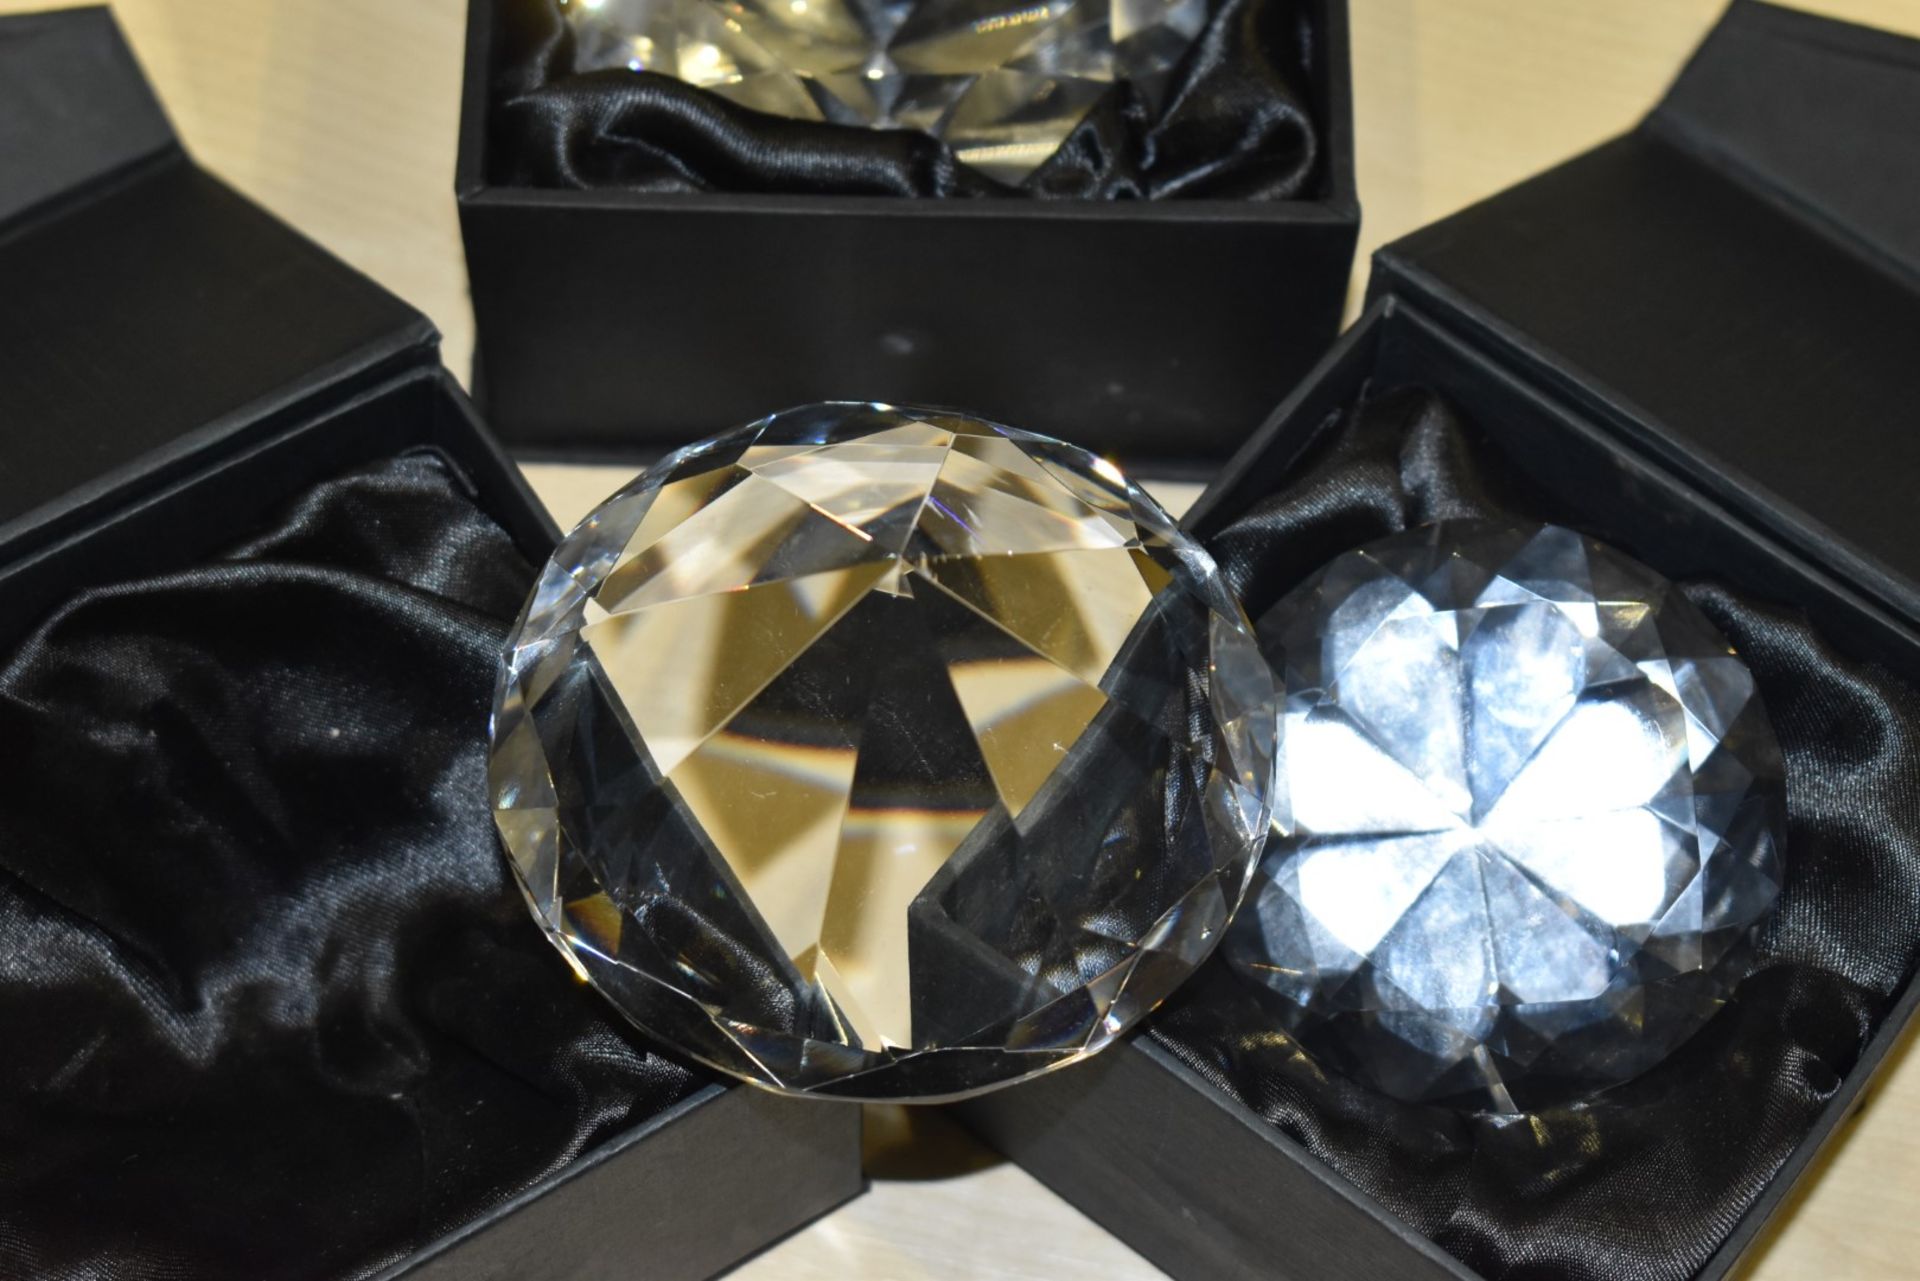 3 x Ice London Faux Diamond Paperweights - New and Boxed - Ref: In2128 wh1 pal1 - CL011 - - Image 4 of 8